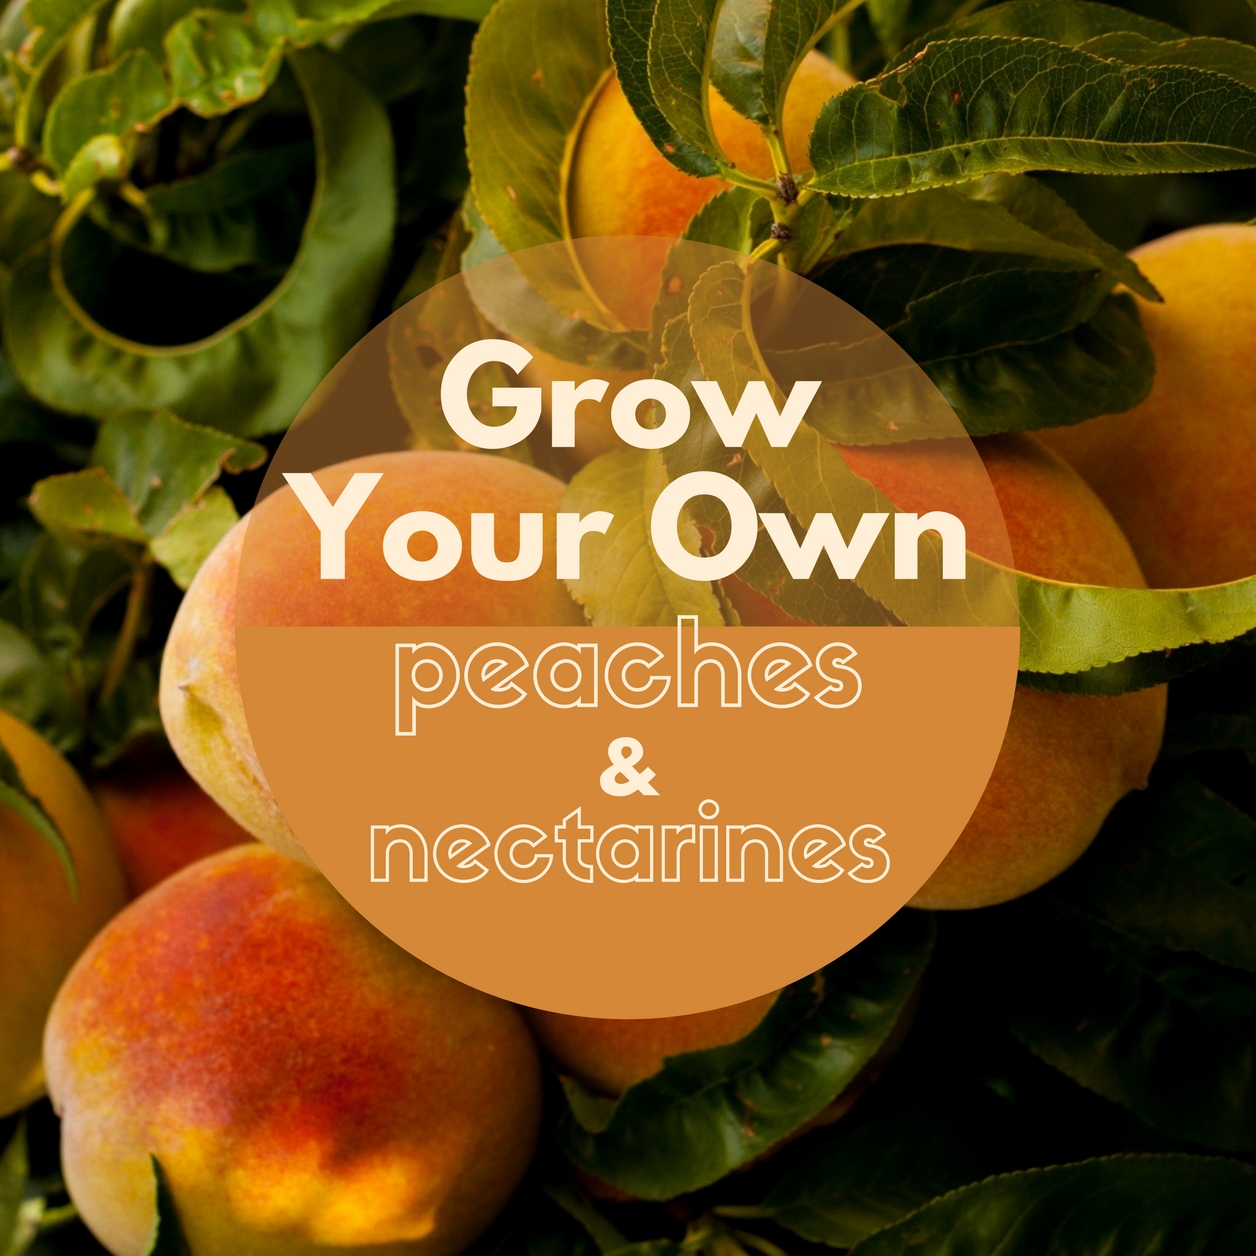 Grow Your Own Peaches and Nectarines